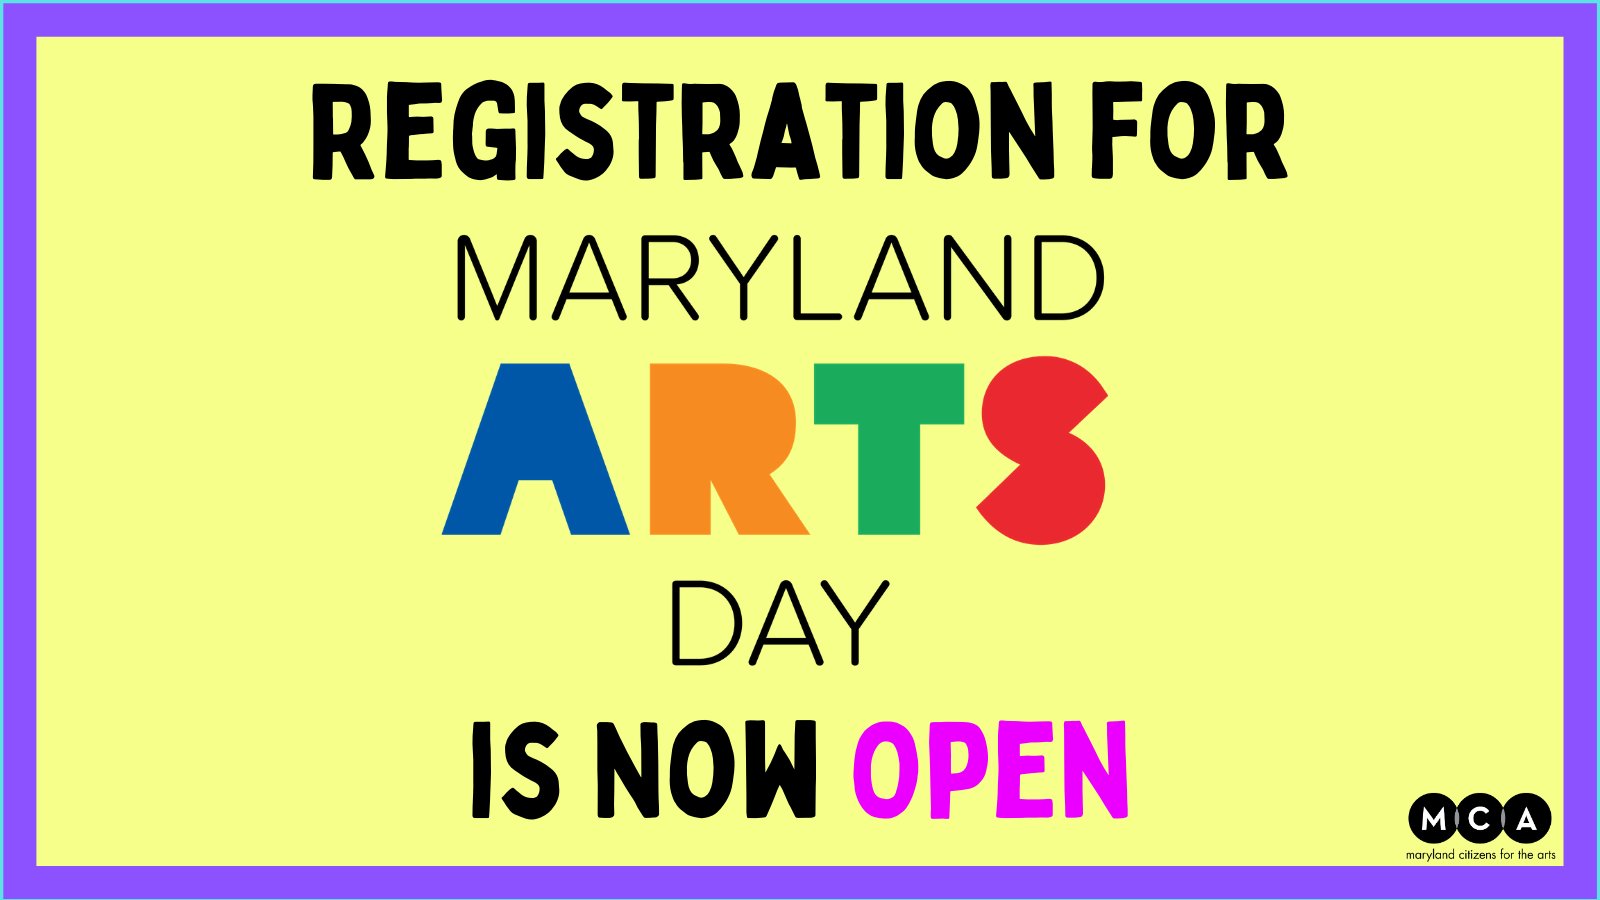 Registration for Maryland Arts Day Now Open! BALTIMORE ARTS